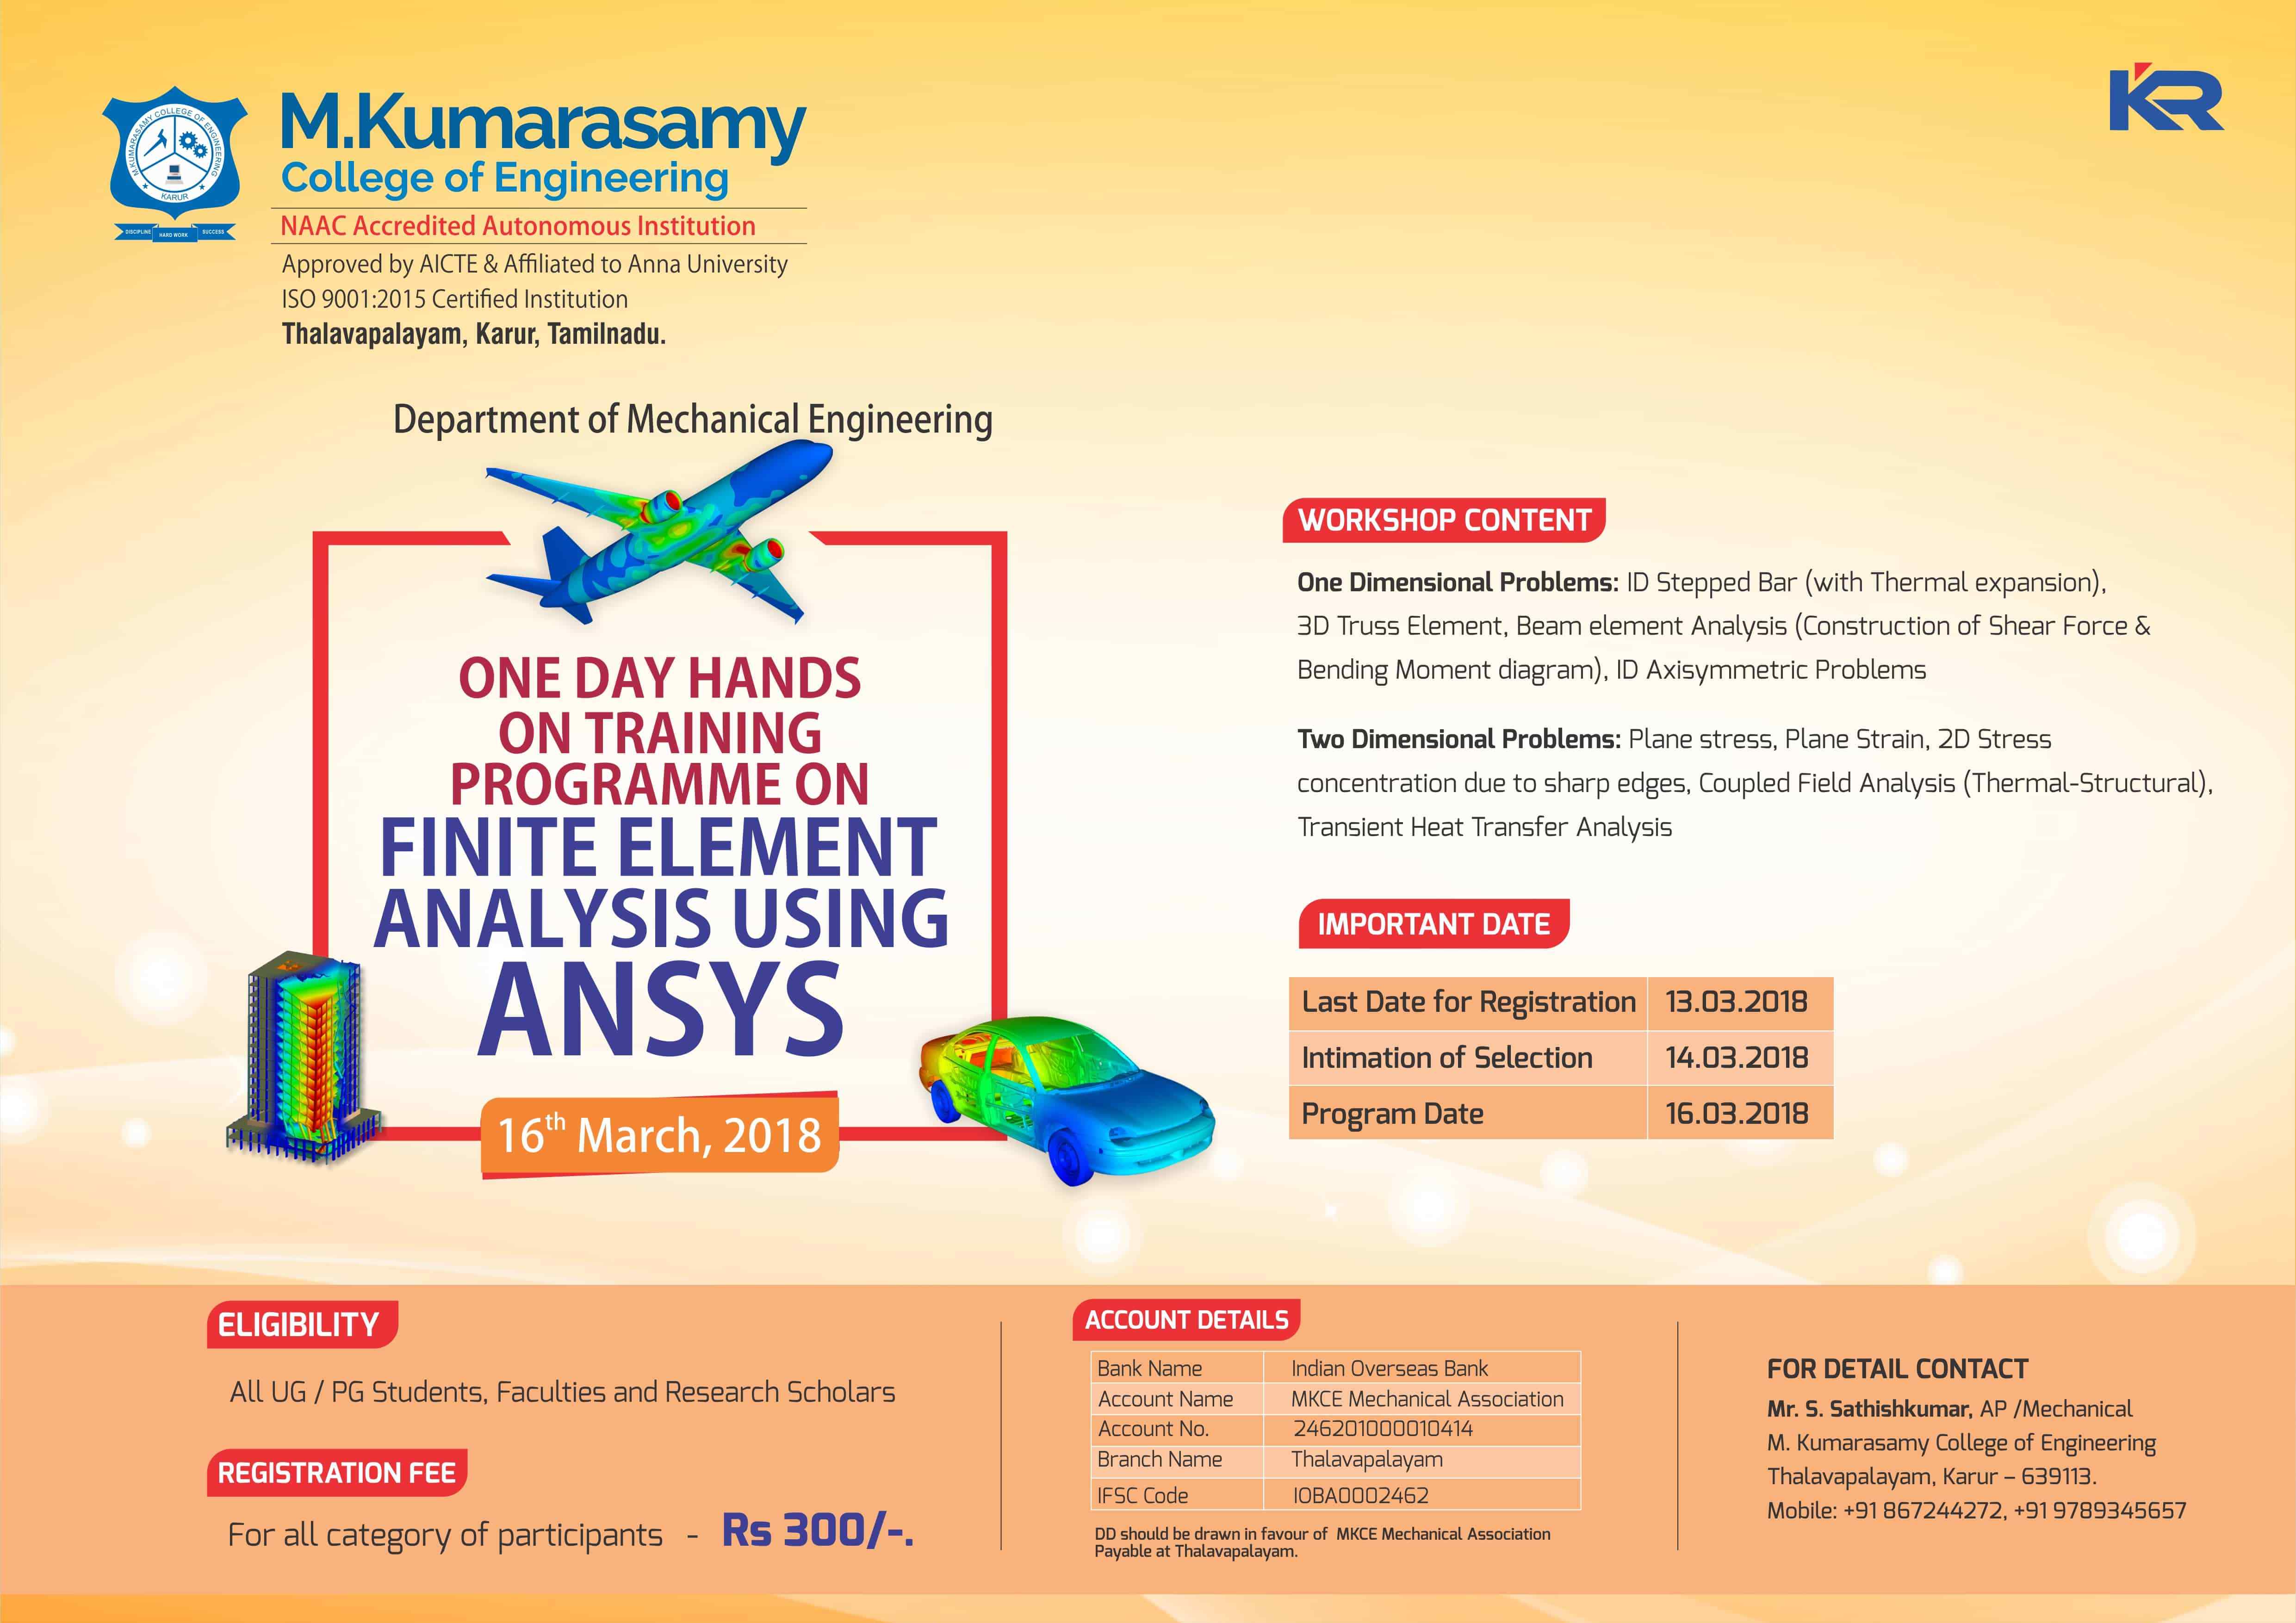 One Day Hands on Training Programme on Finite Element Analysis using ANSYS 2018